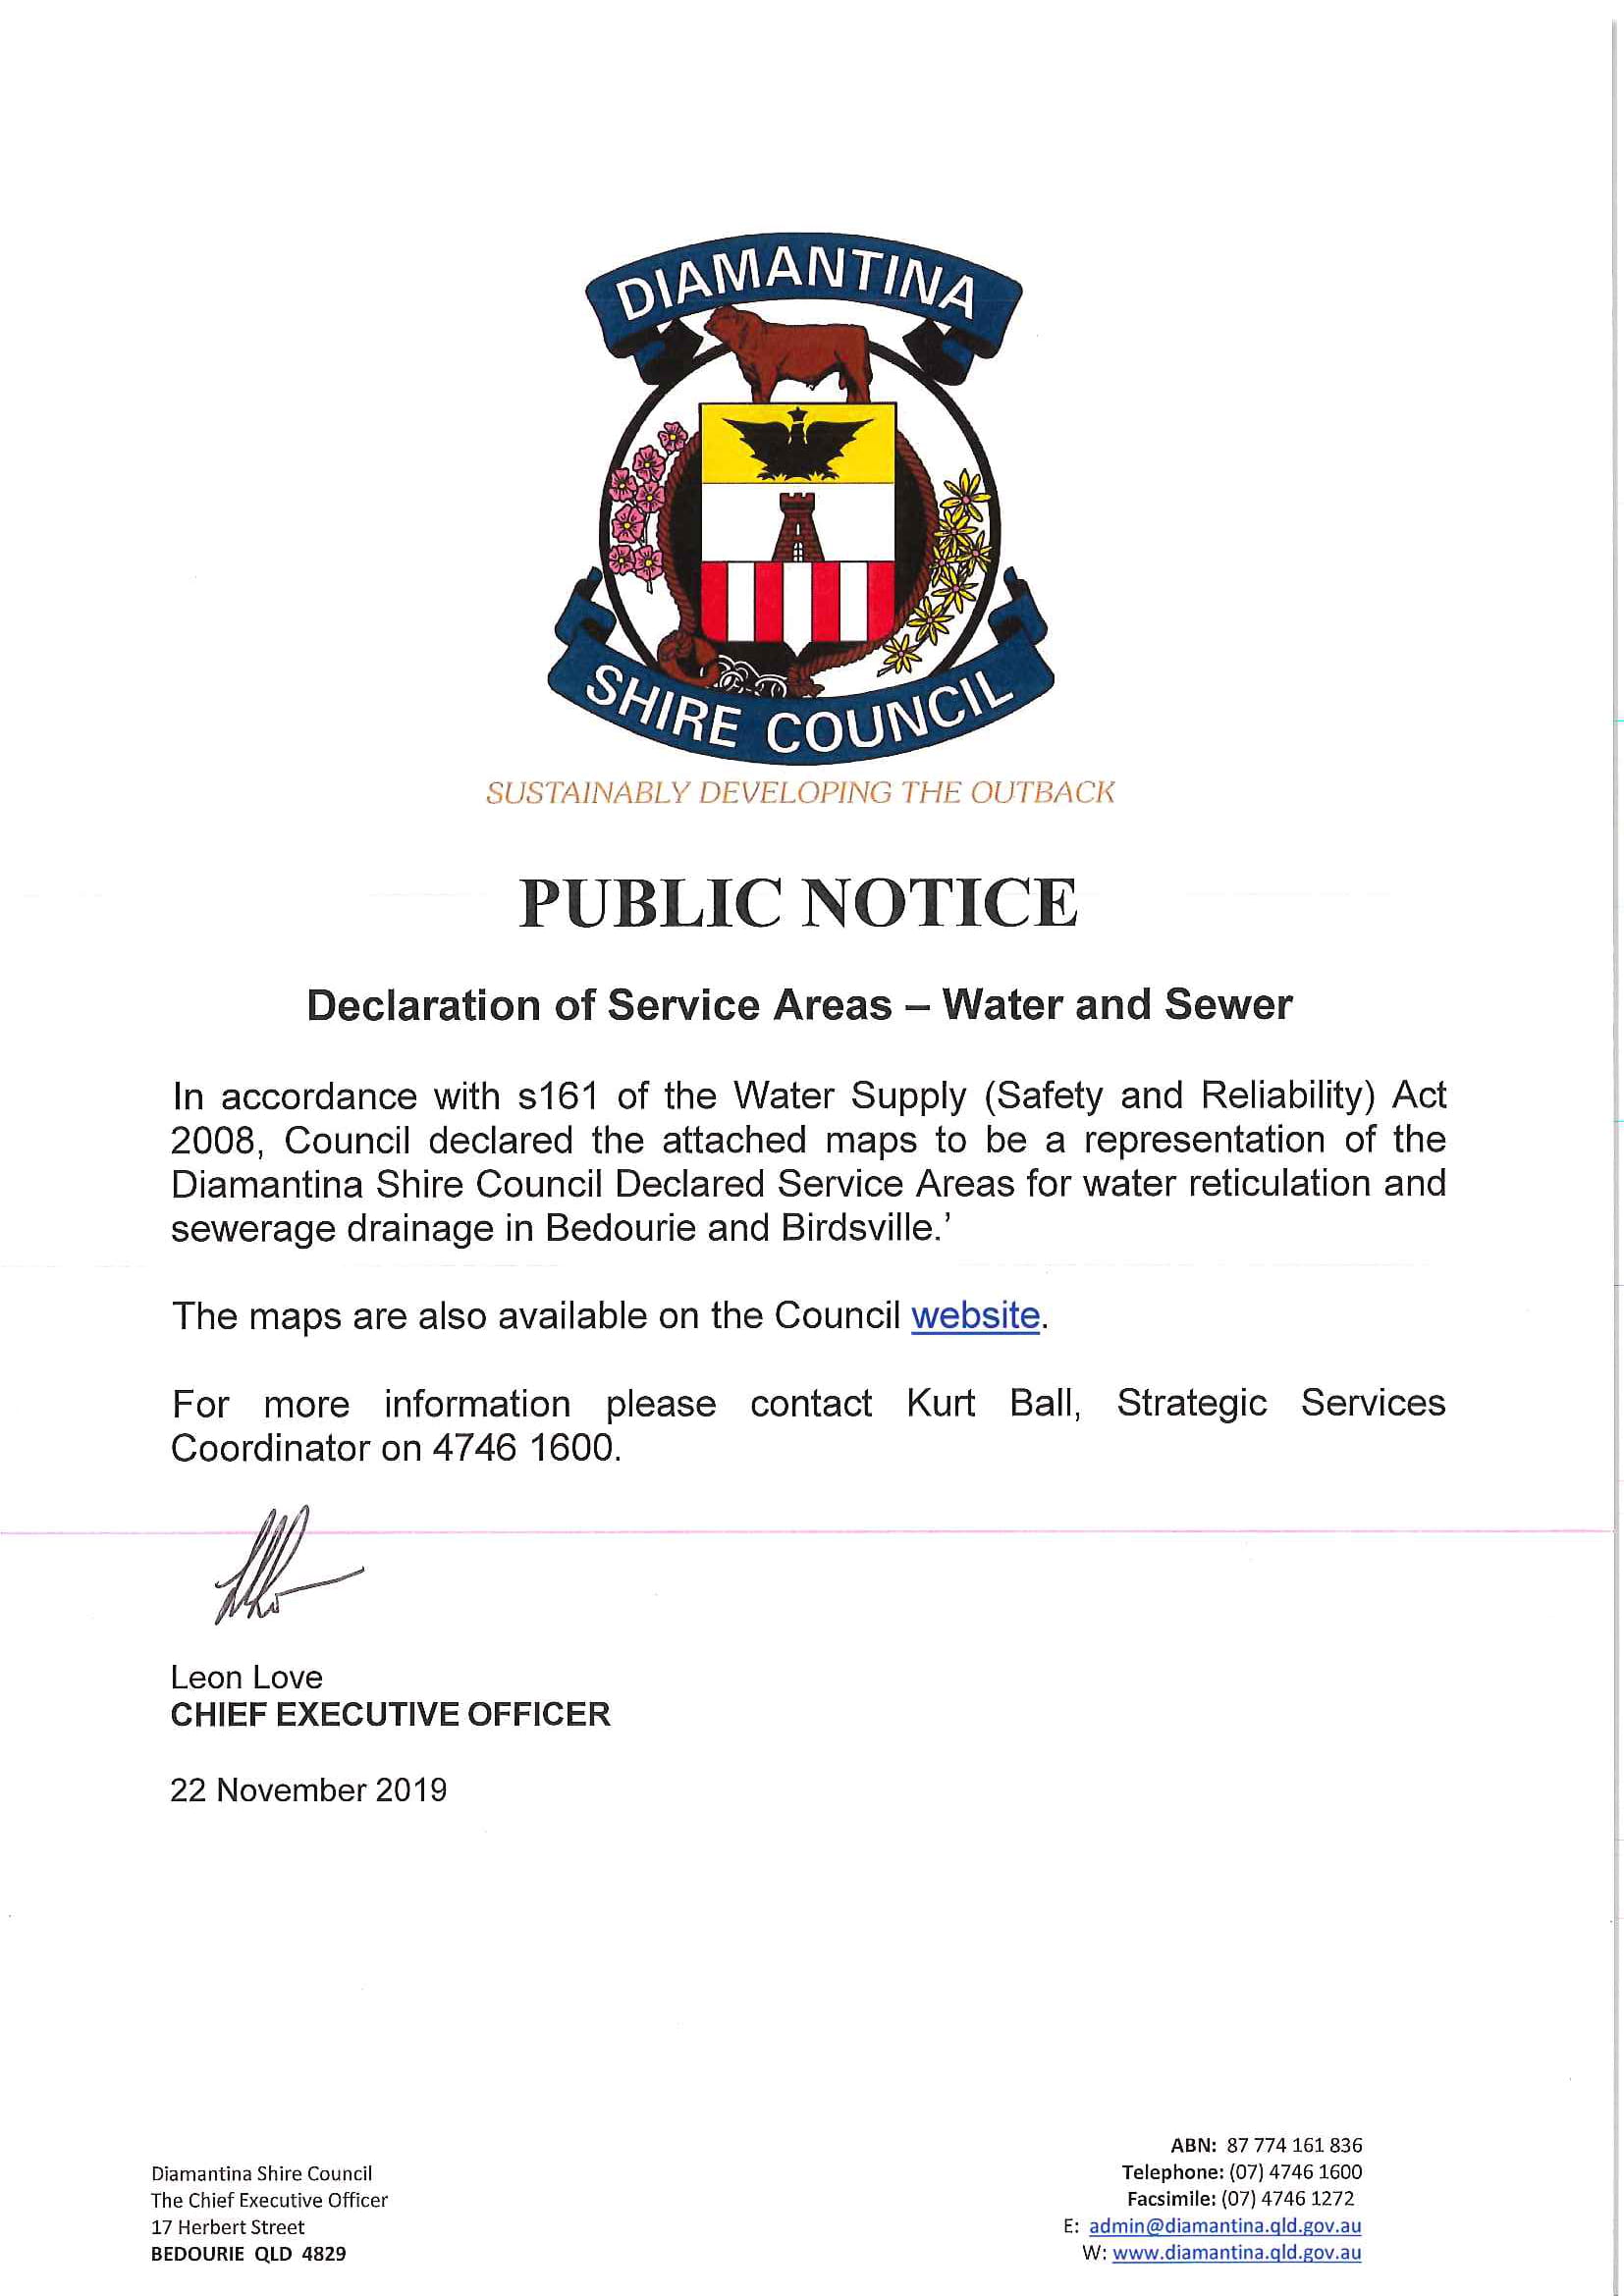 034 Public notice declaration of service areas water and sewer 1